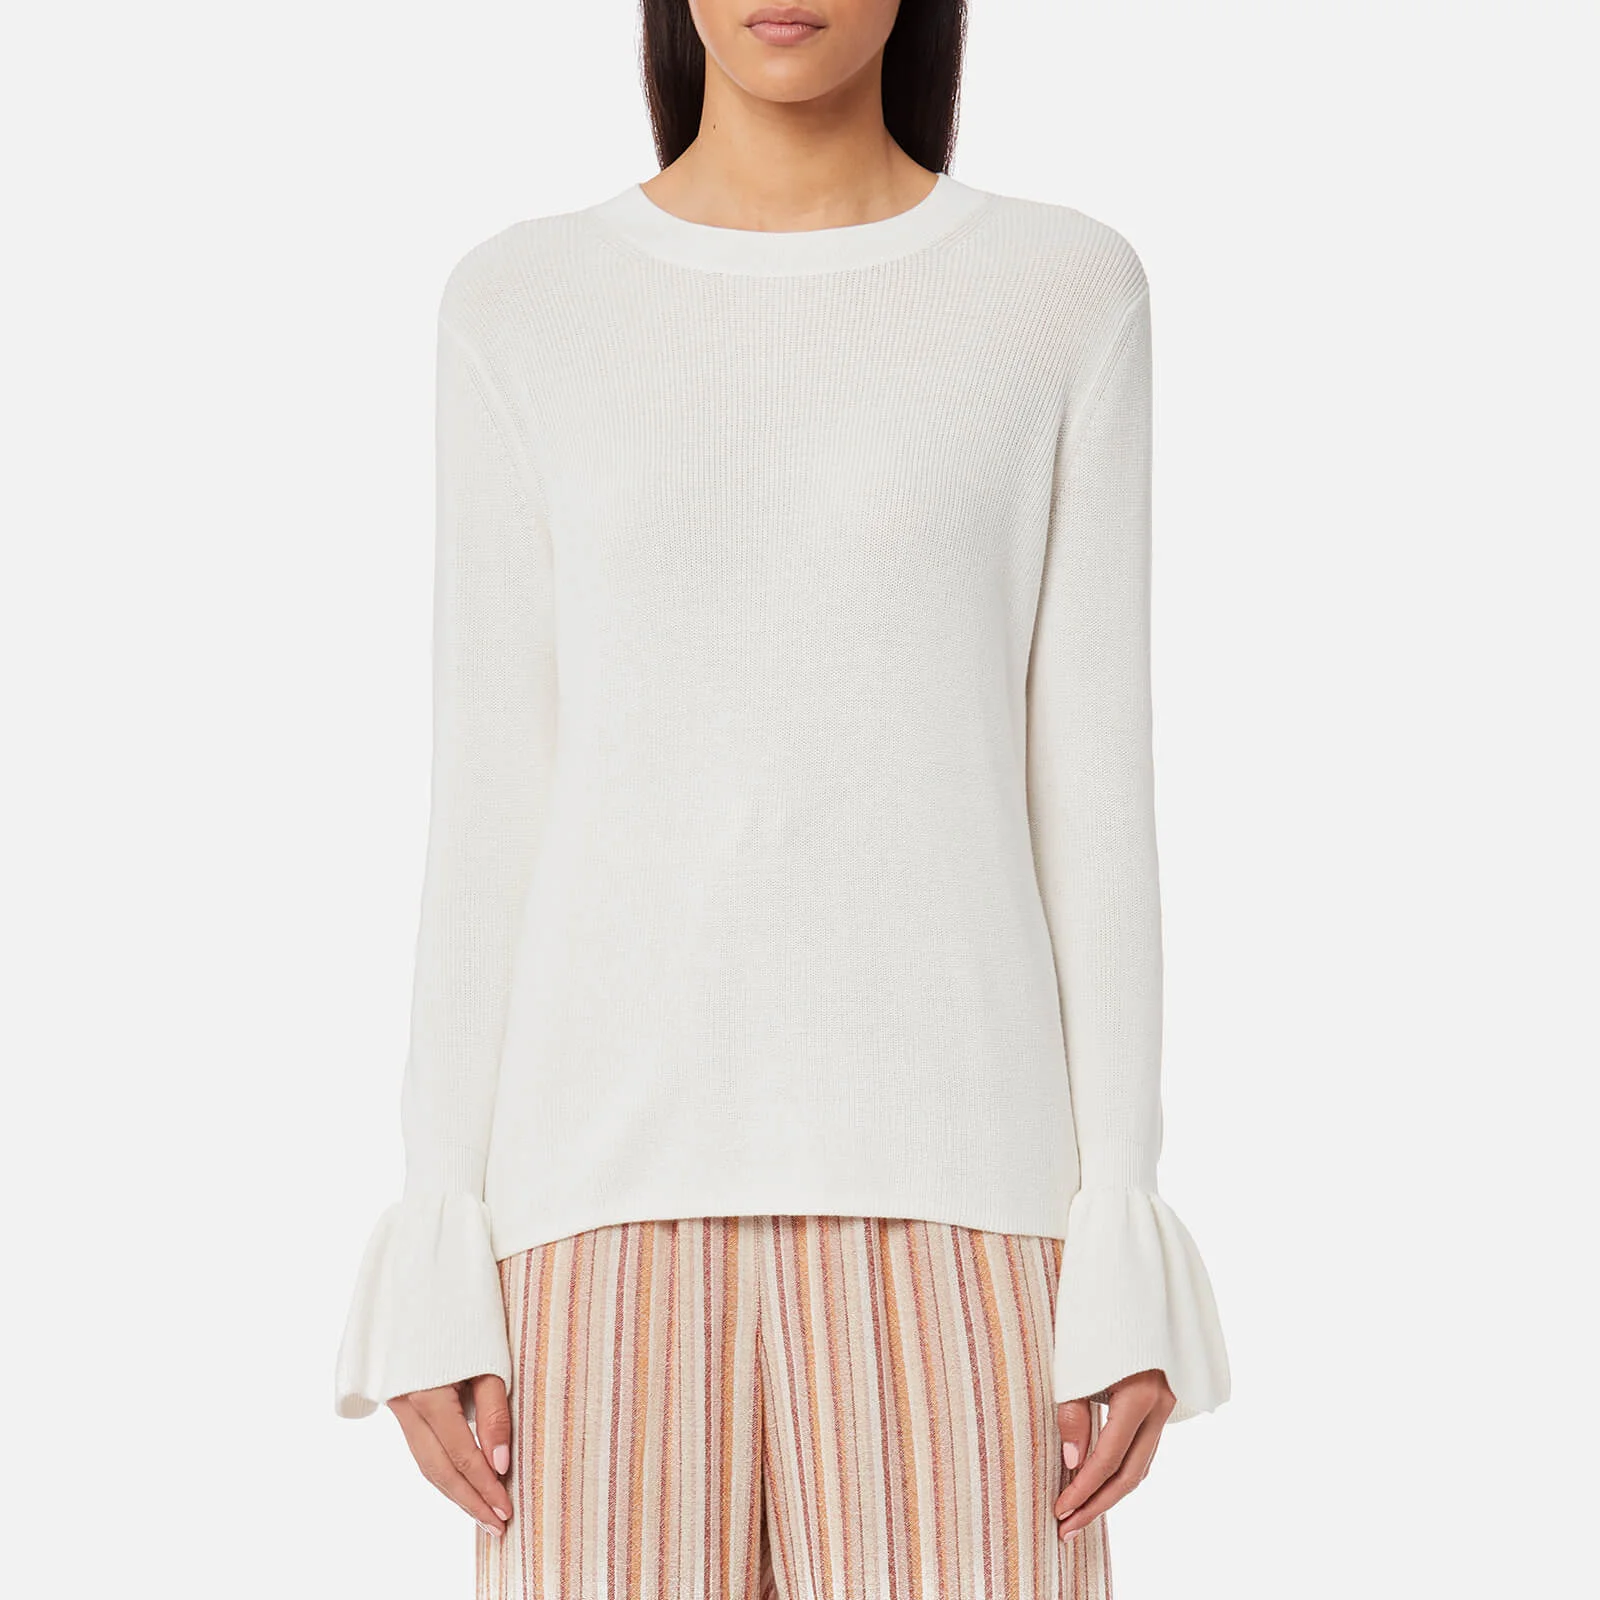 See By Chloé Women's Scalloped Knitted Jumper - Snow White Image 1